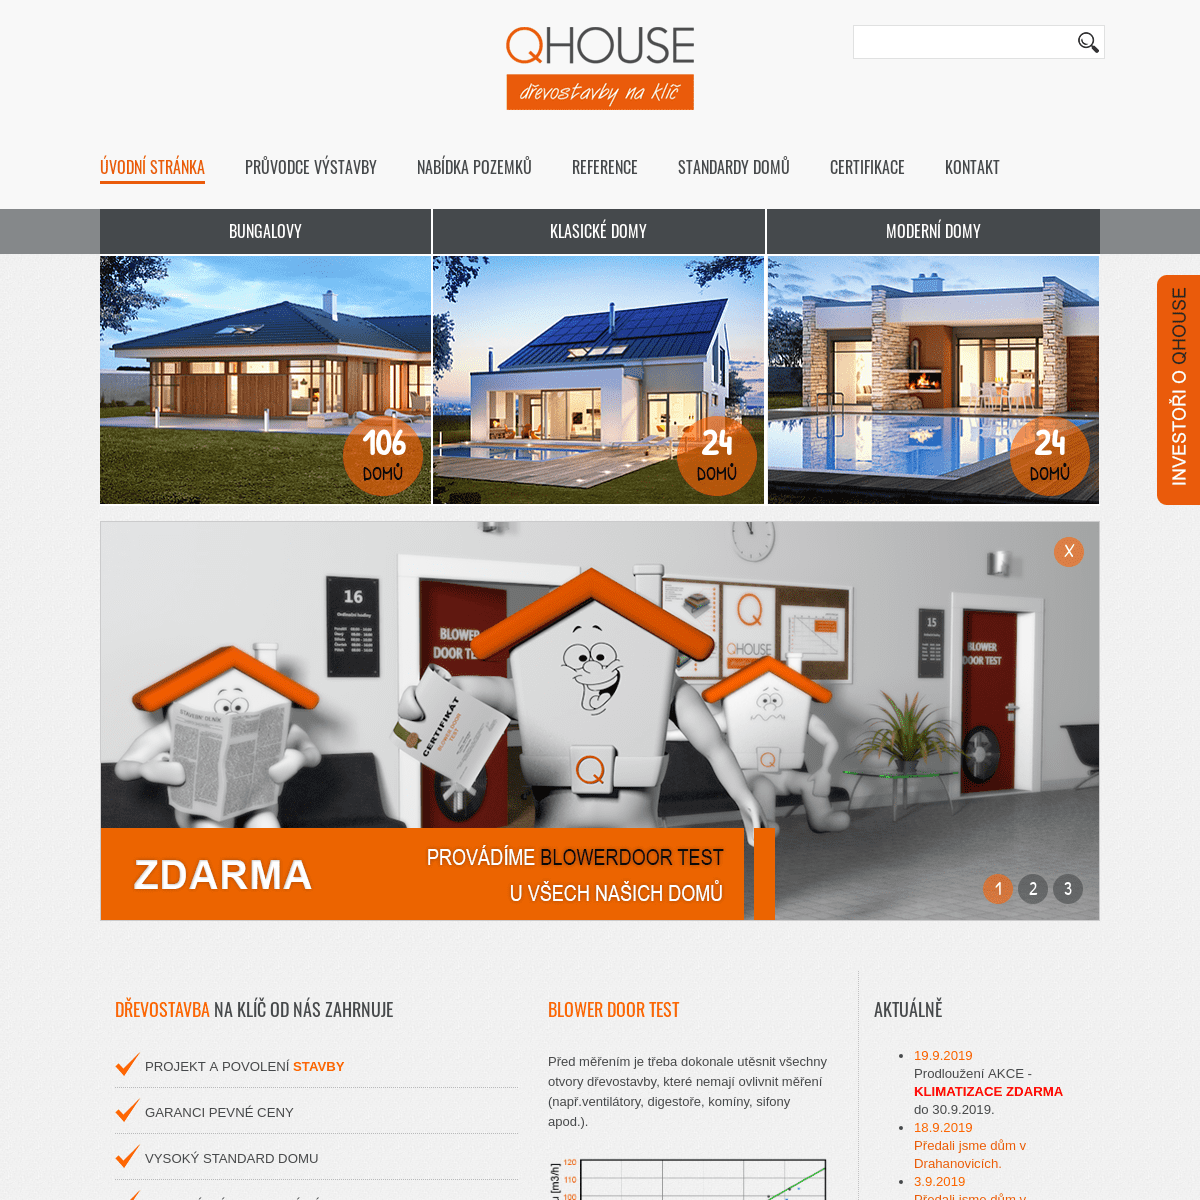 A complete backup of qhouse.cz